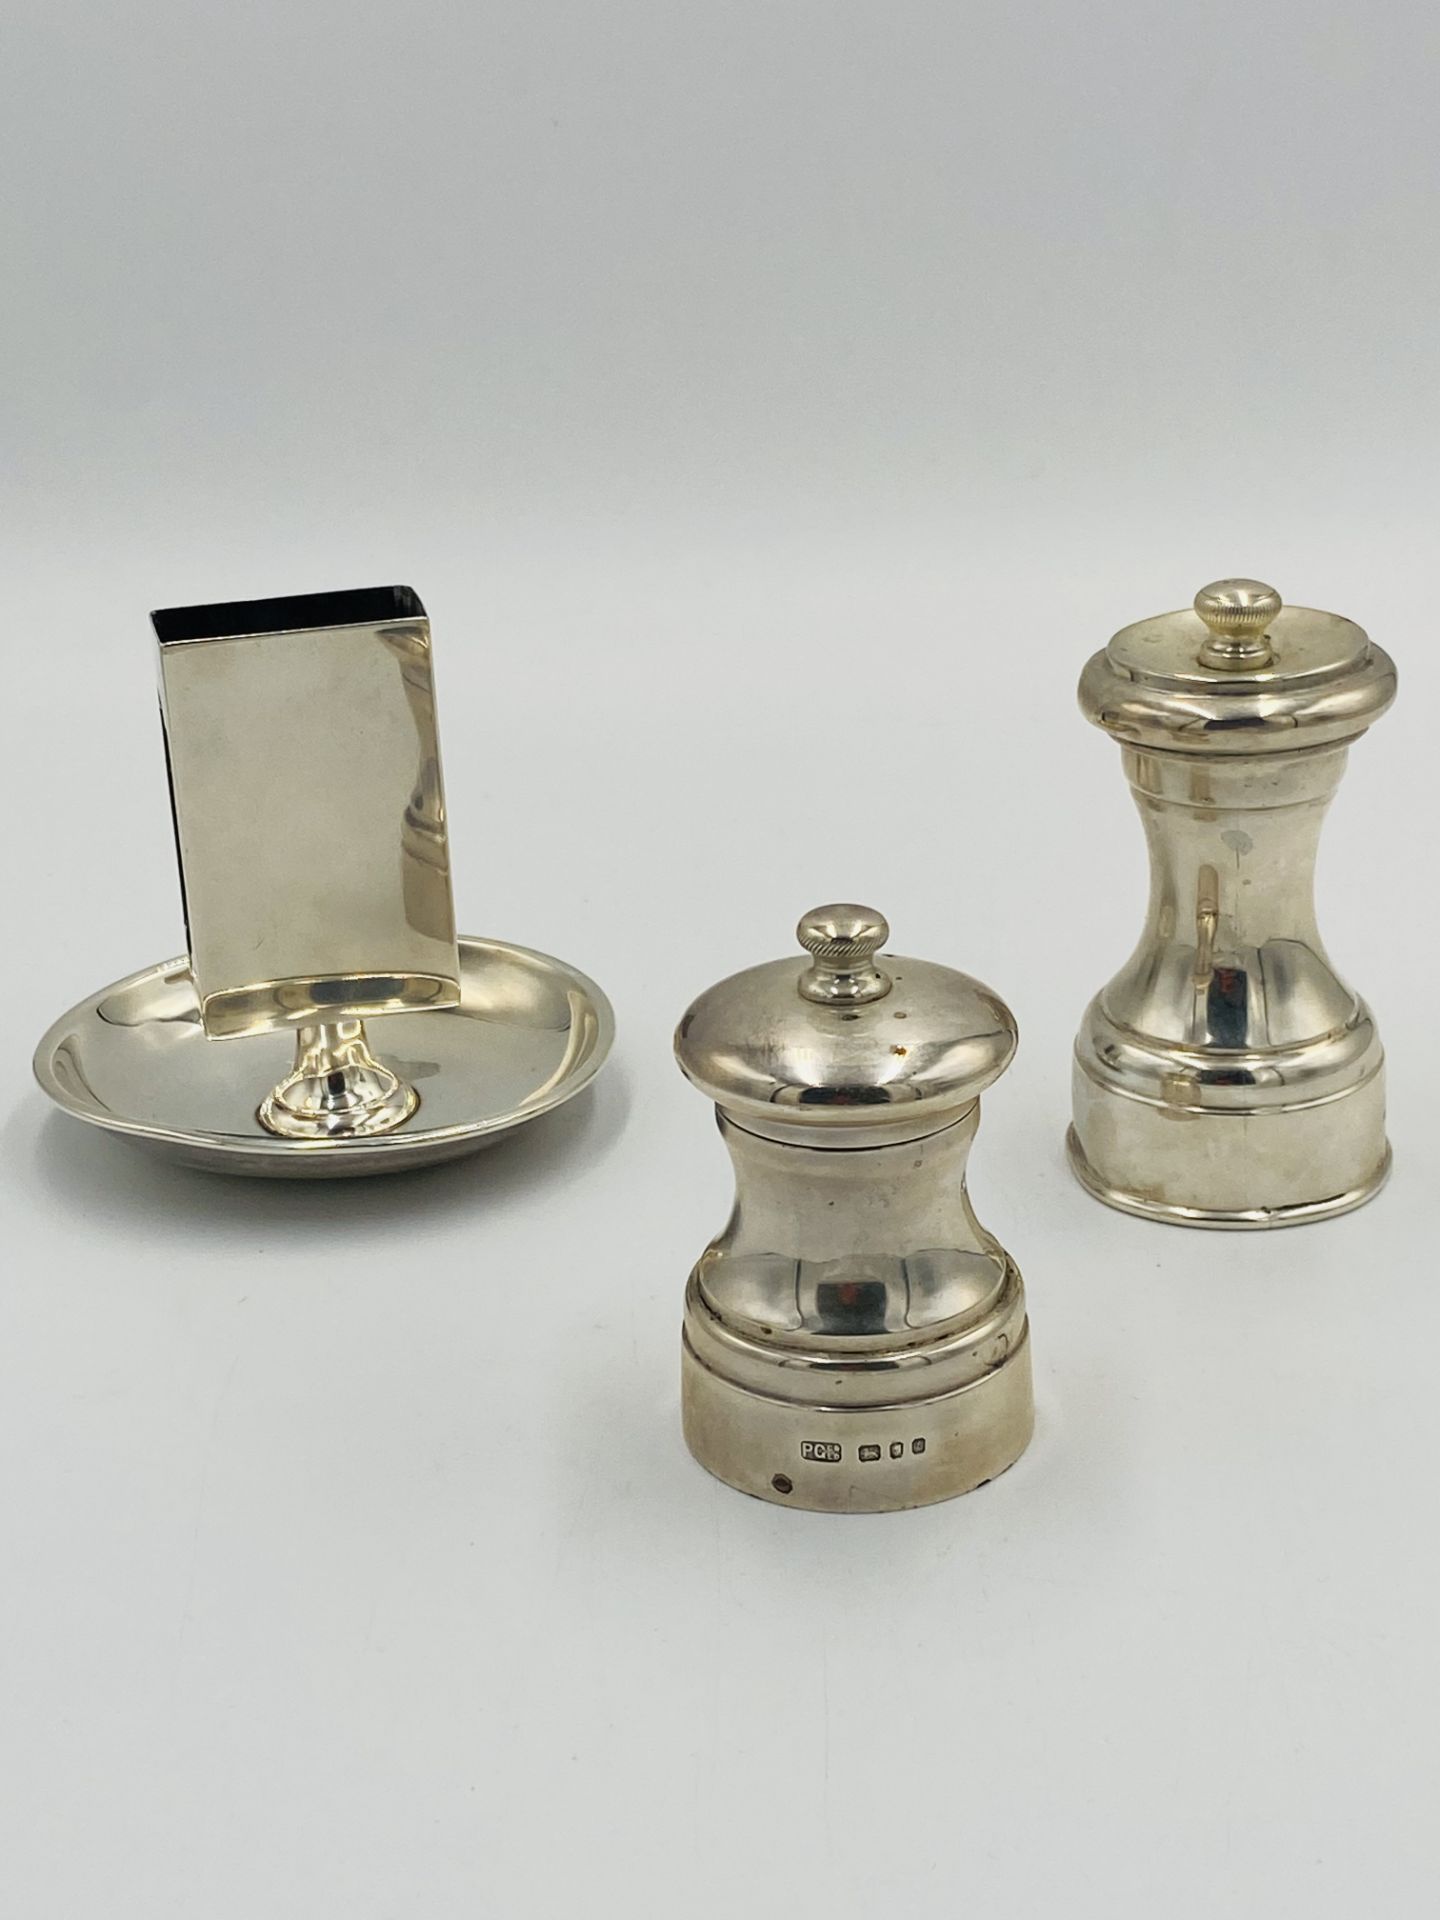 Two silver pepper grinders together with a silver matchbox holder